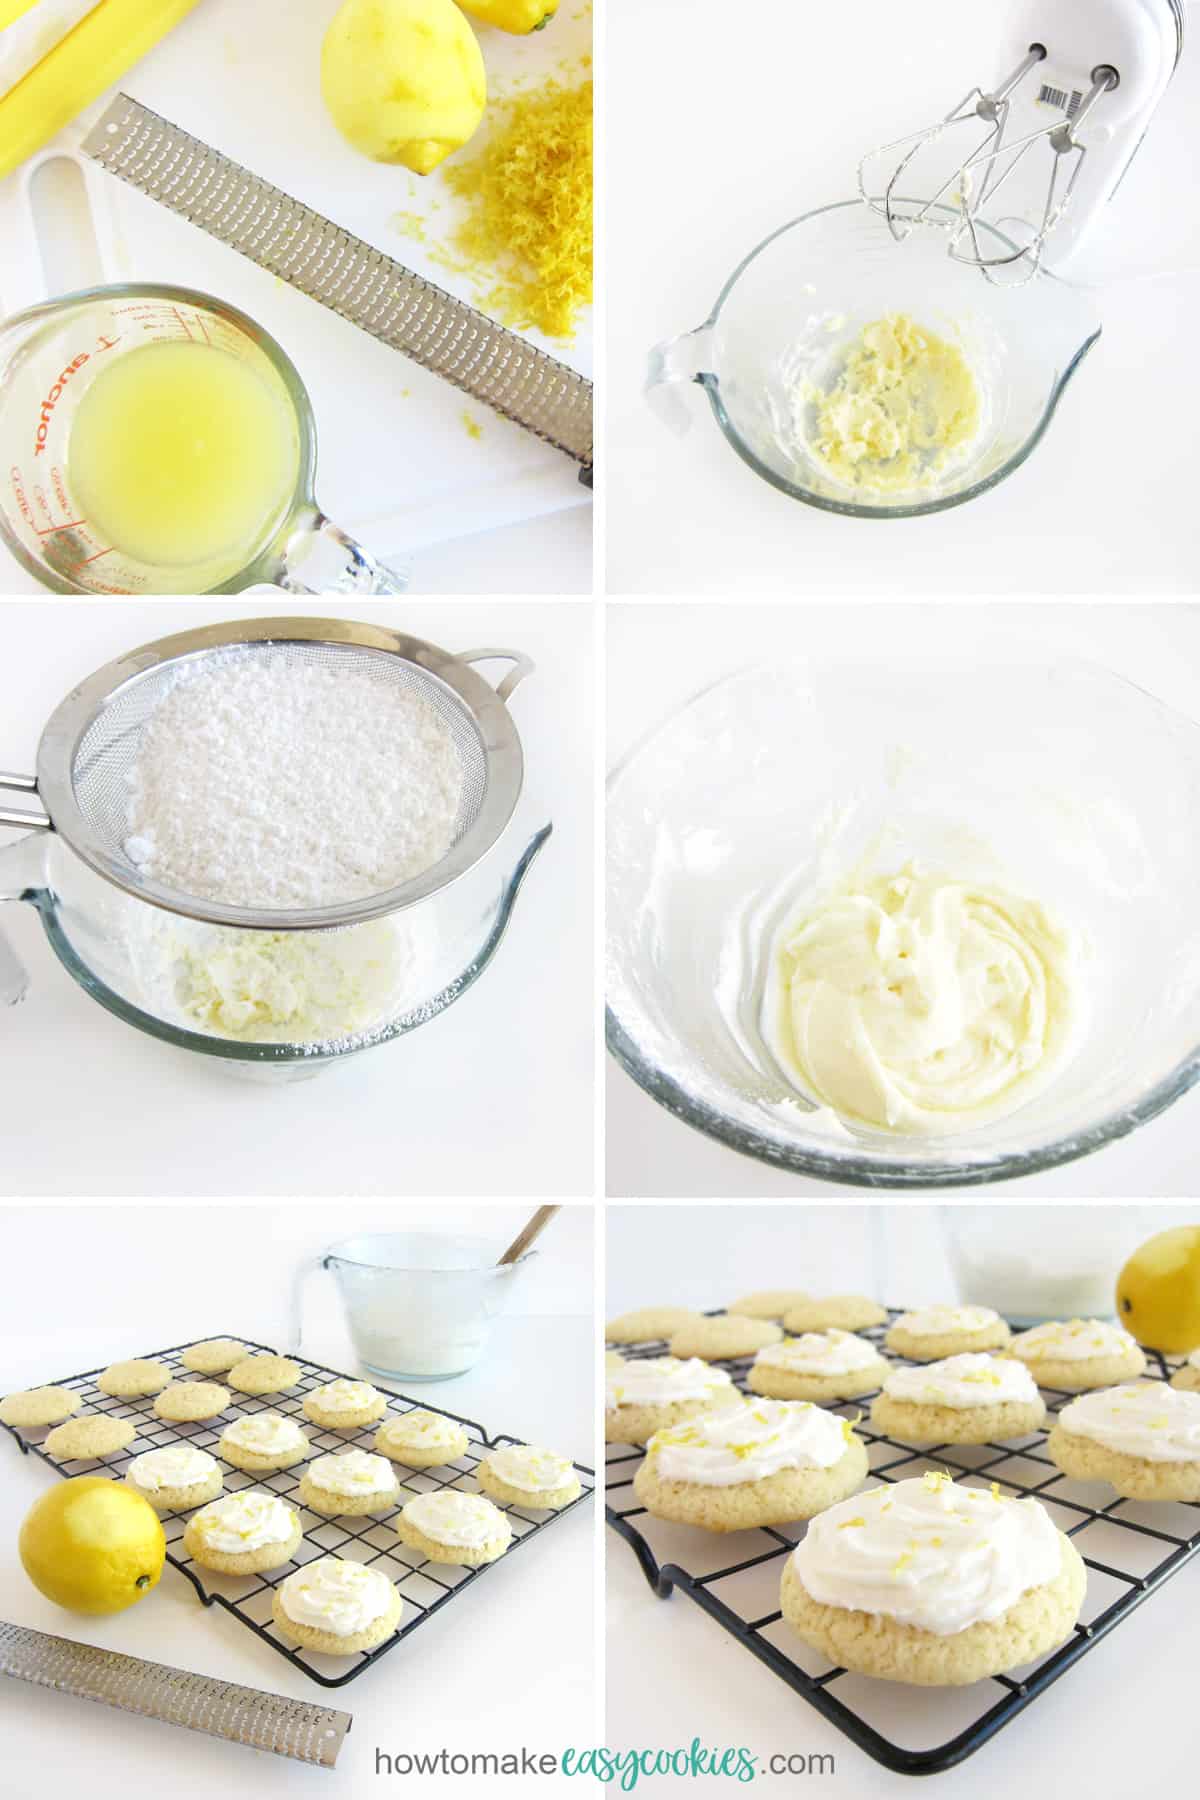 Make lemon icing by mixing butter, powdered sugar, lemon juice, and lemon zest together. Then frost the lemon cookies.